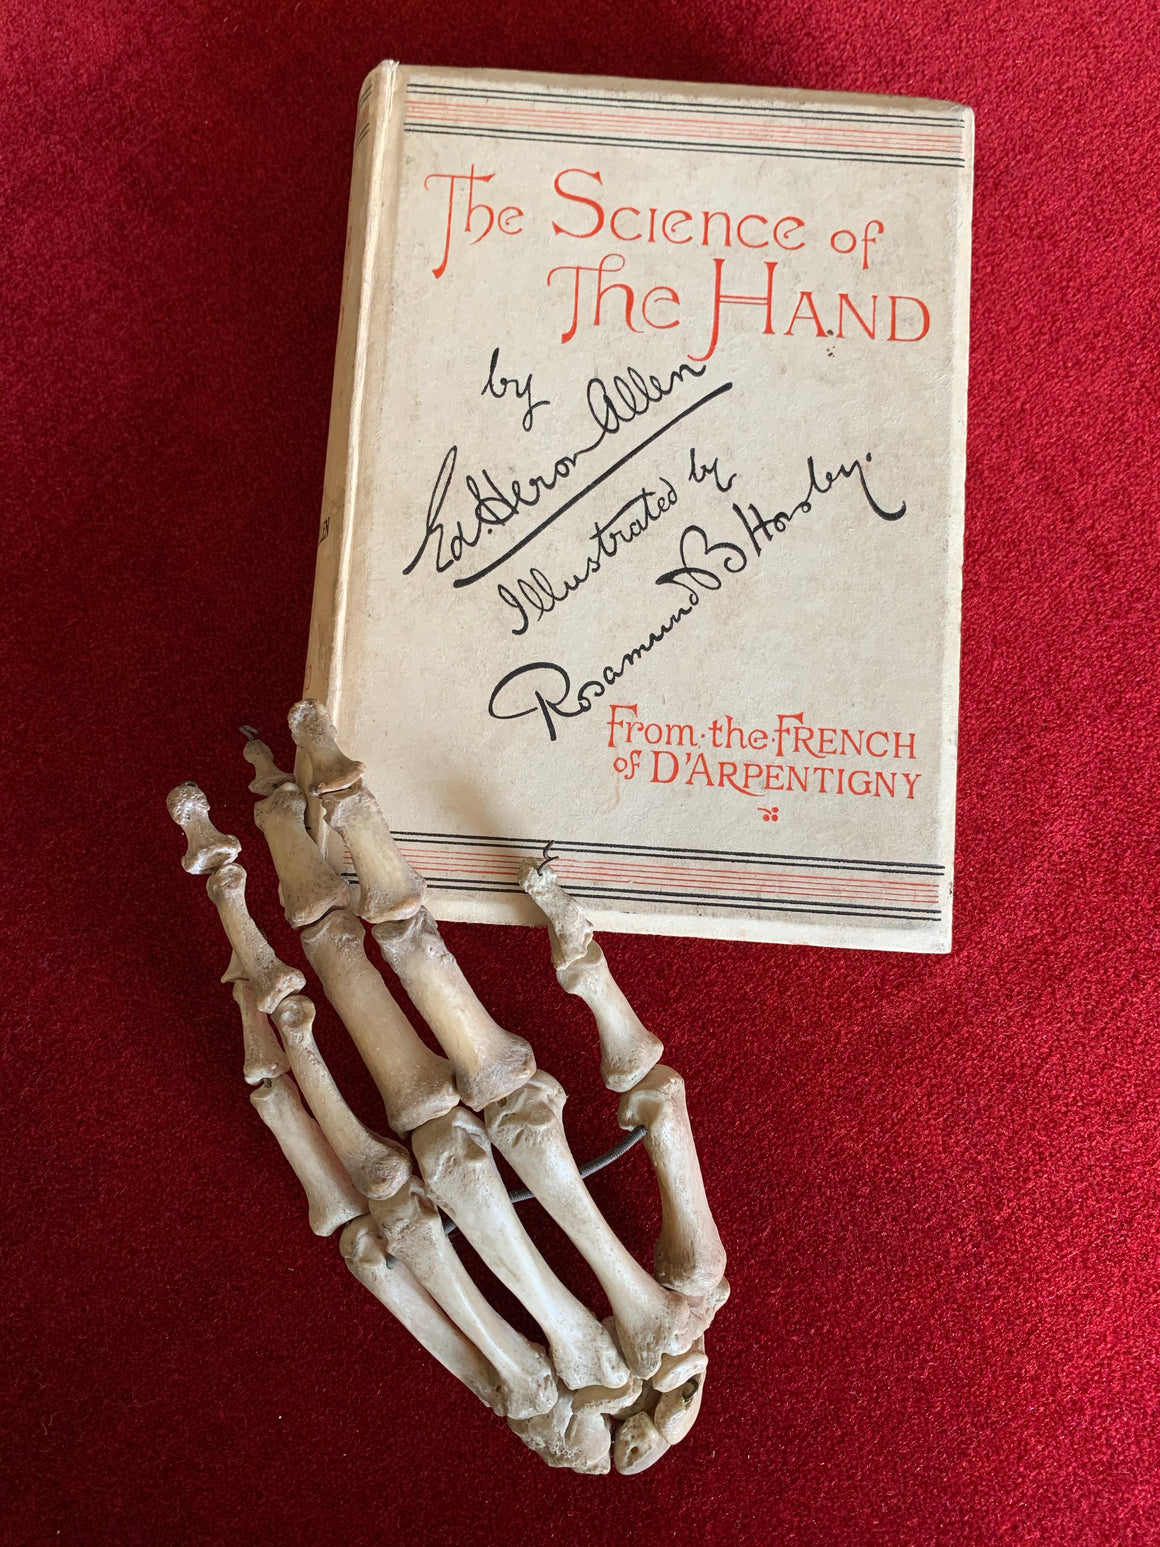 Antiquarian book ‘The Science of The Hand’ by D'Arpentigny 1895- Palmistry interest